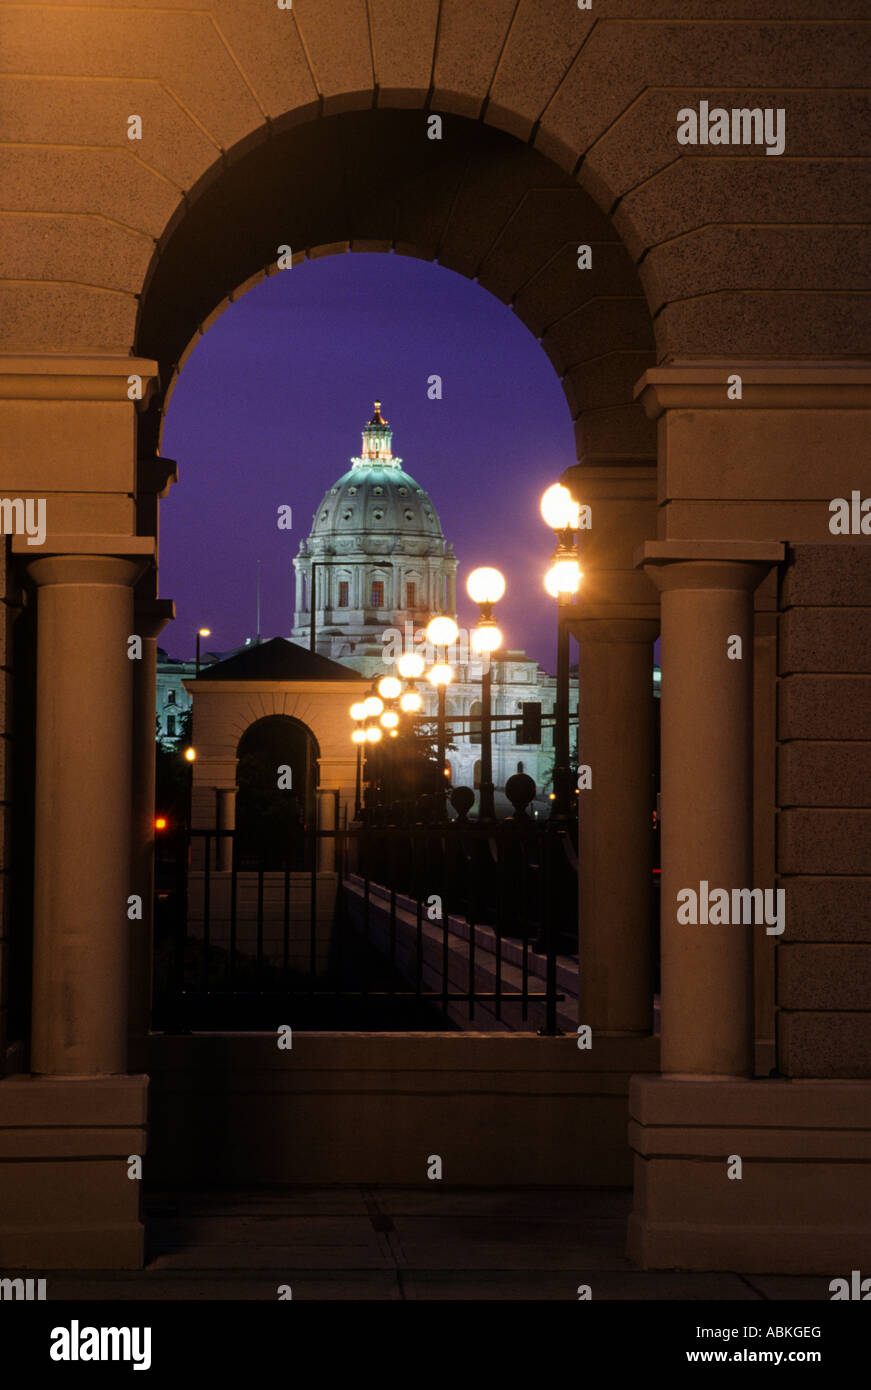 MINNESOTA STATE CAPITOL BUILDING DURCH STONE ARCH IN ST. PAUL, MINNESOTA.  SOMMERABEND. Stockfoto